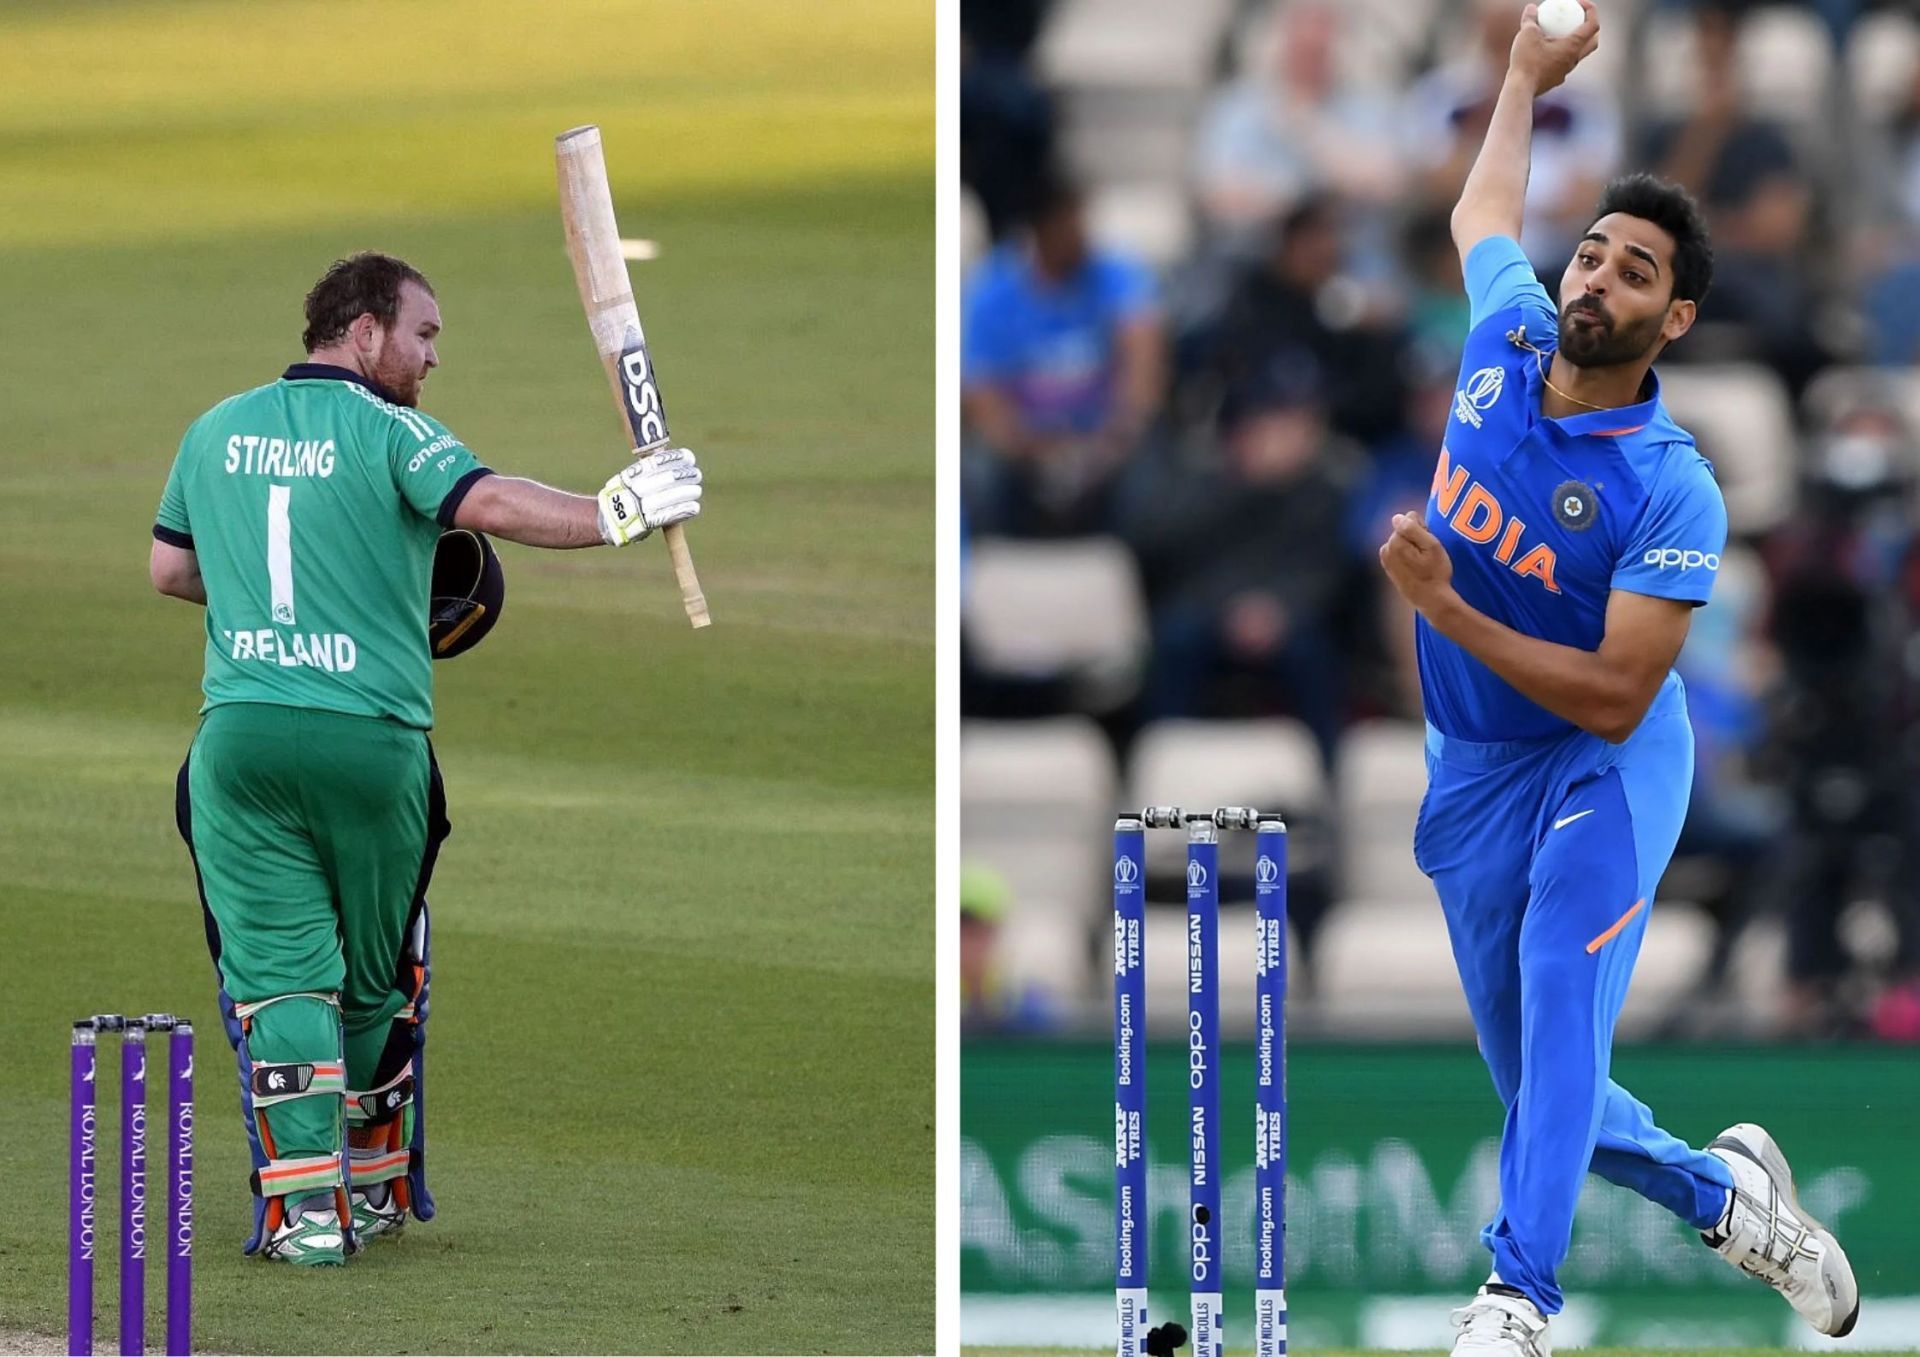 Paul Stirling against Bhuvneshwar Kumar could set up how things transpire in the T20s between Ireland and India.